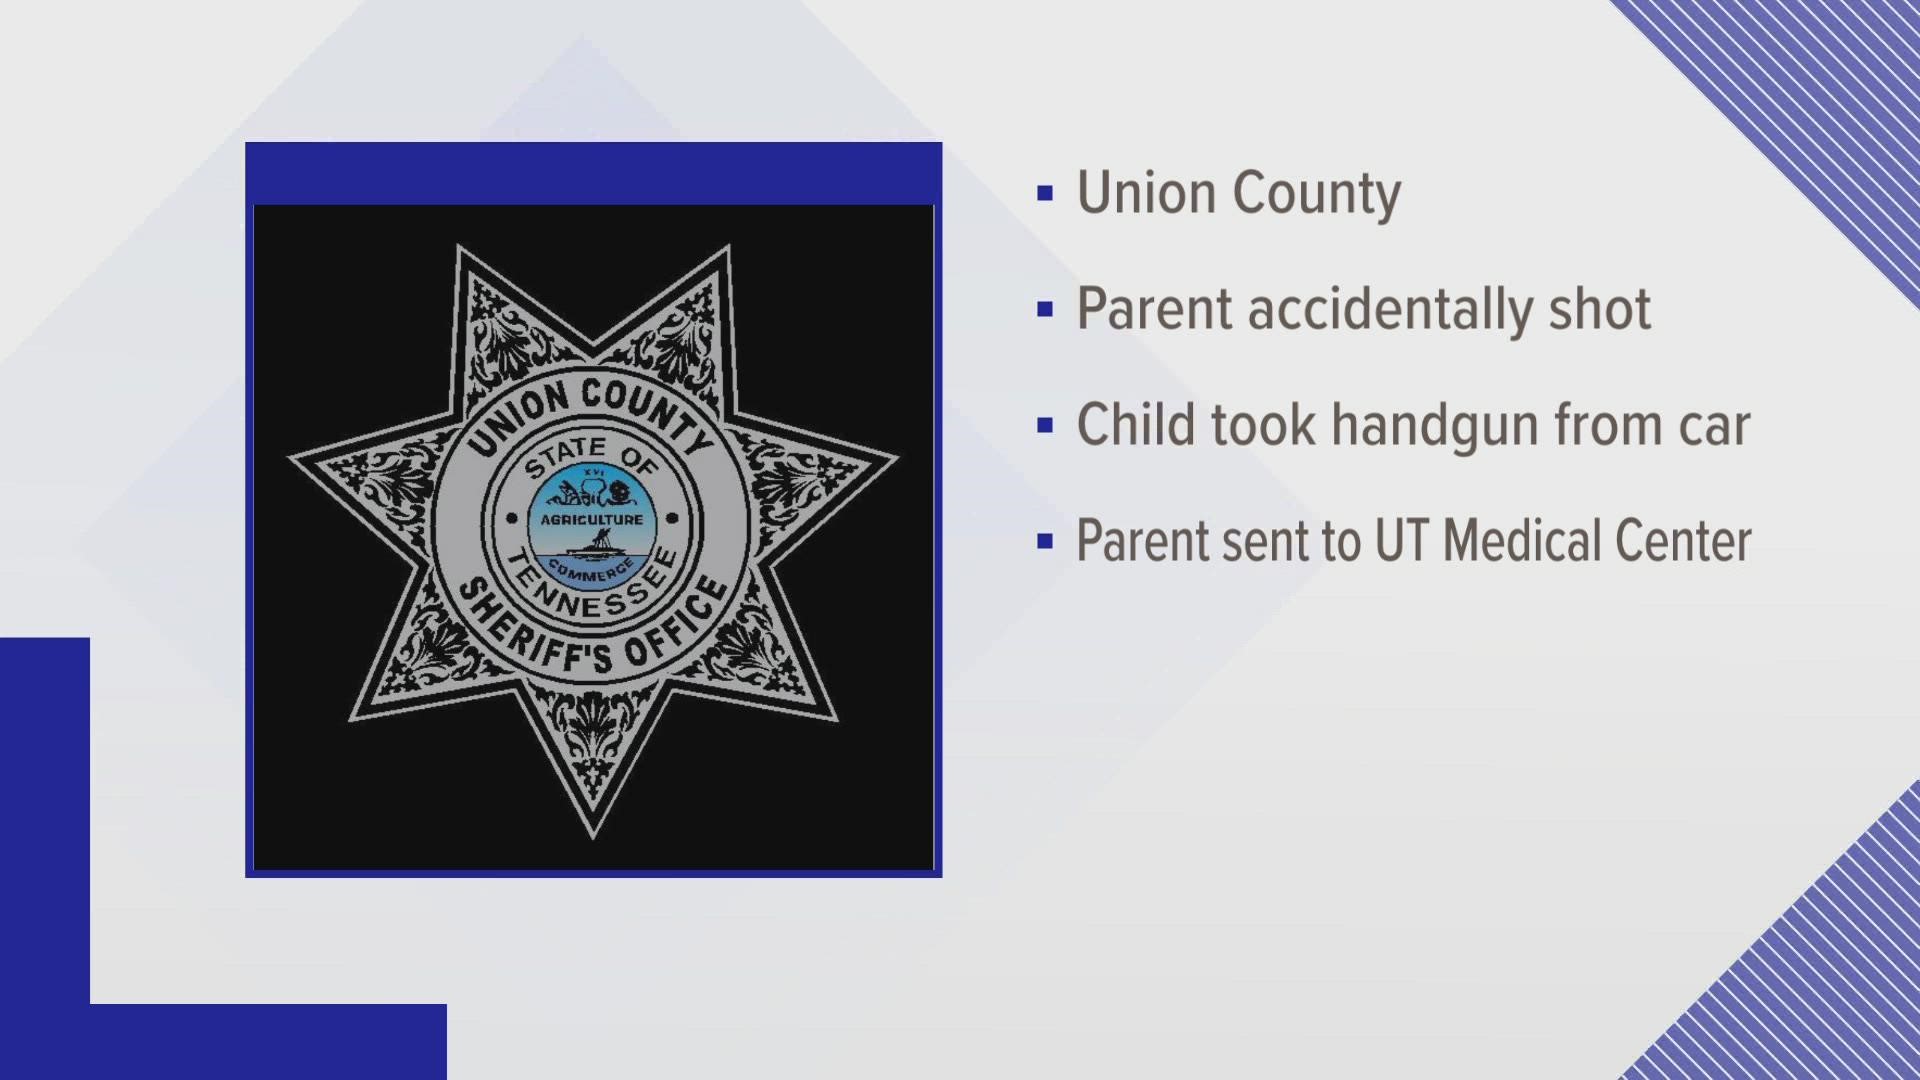 Deputies said the small child was able to get ahold of a handgun in the parent's vehicle.